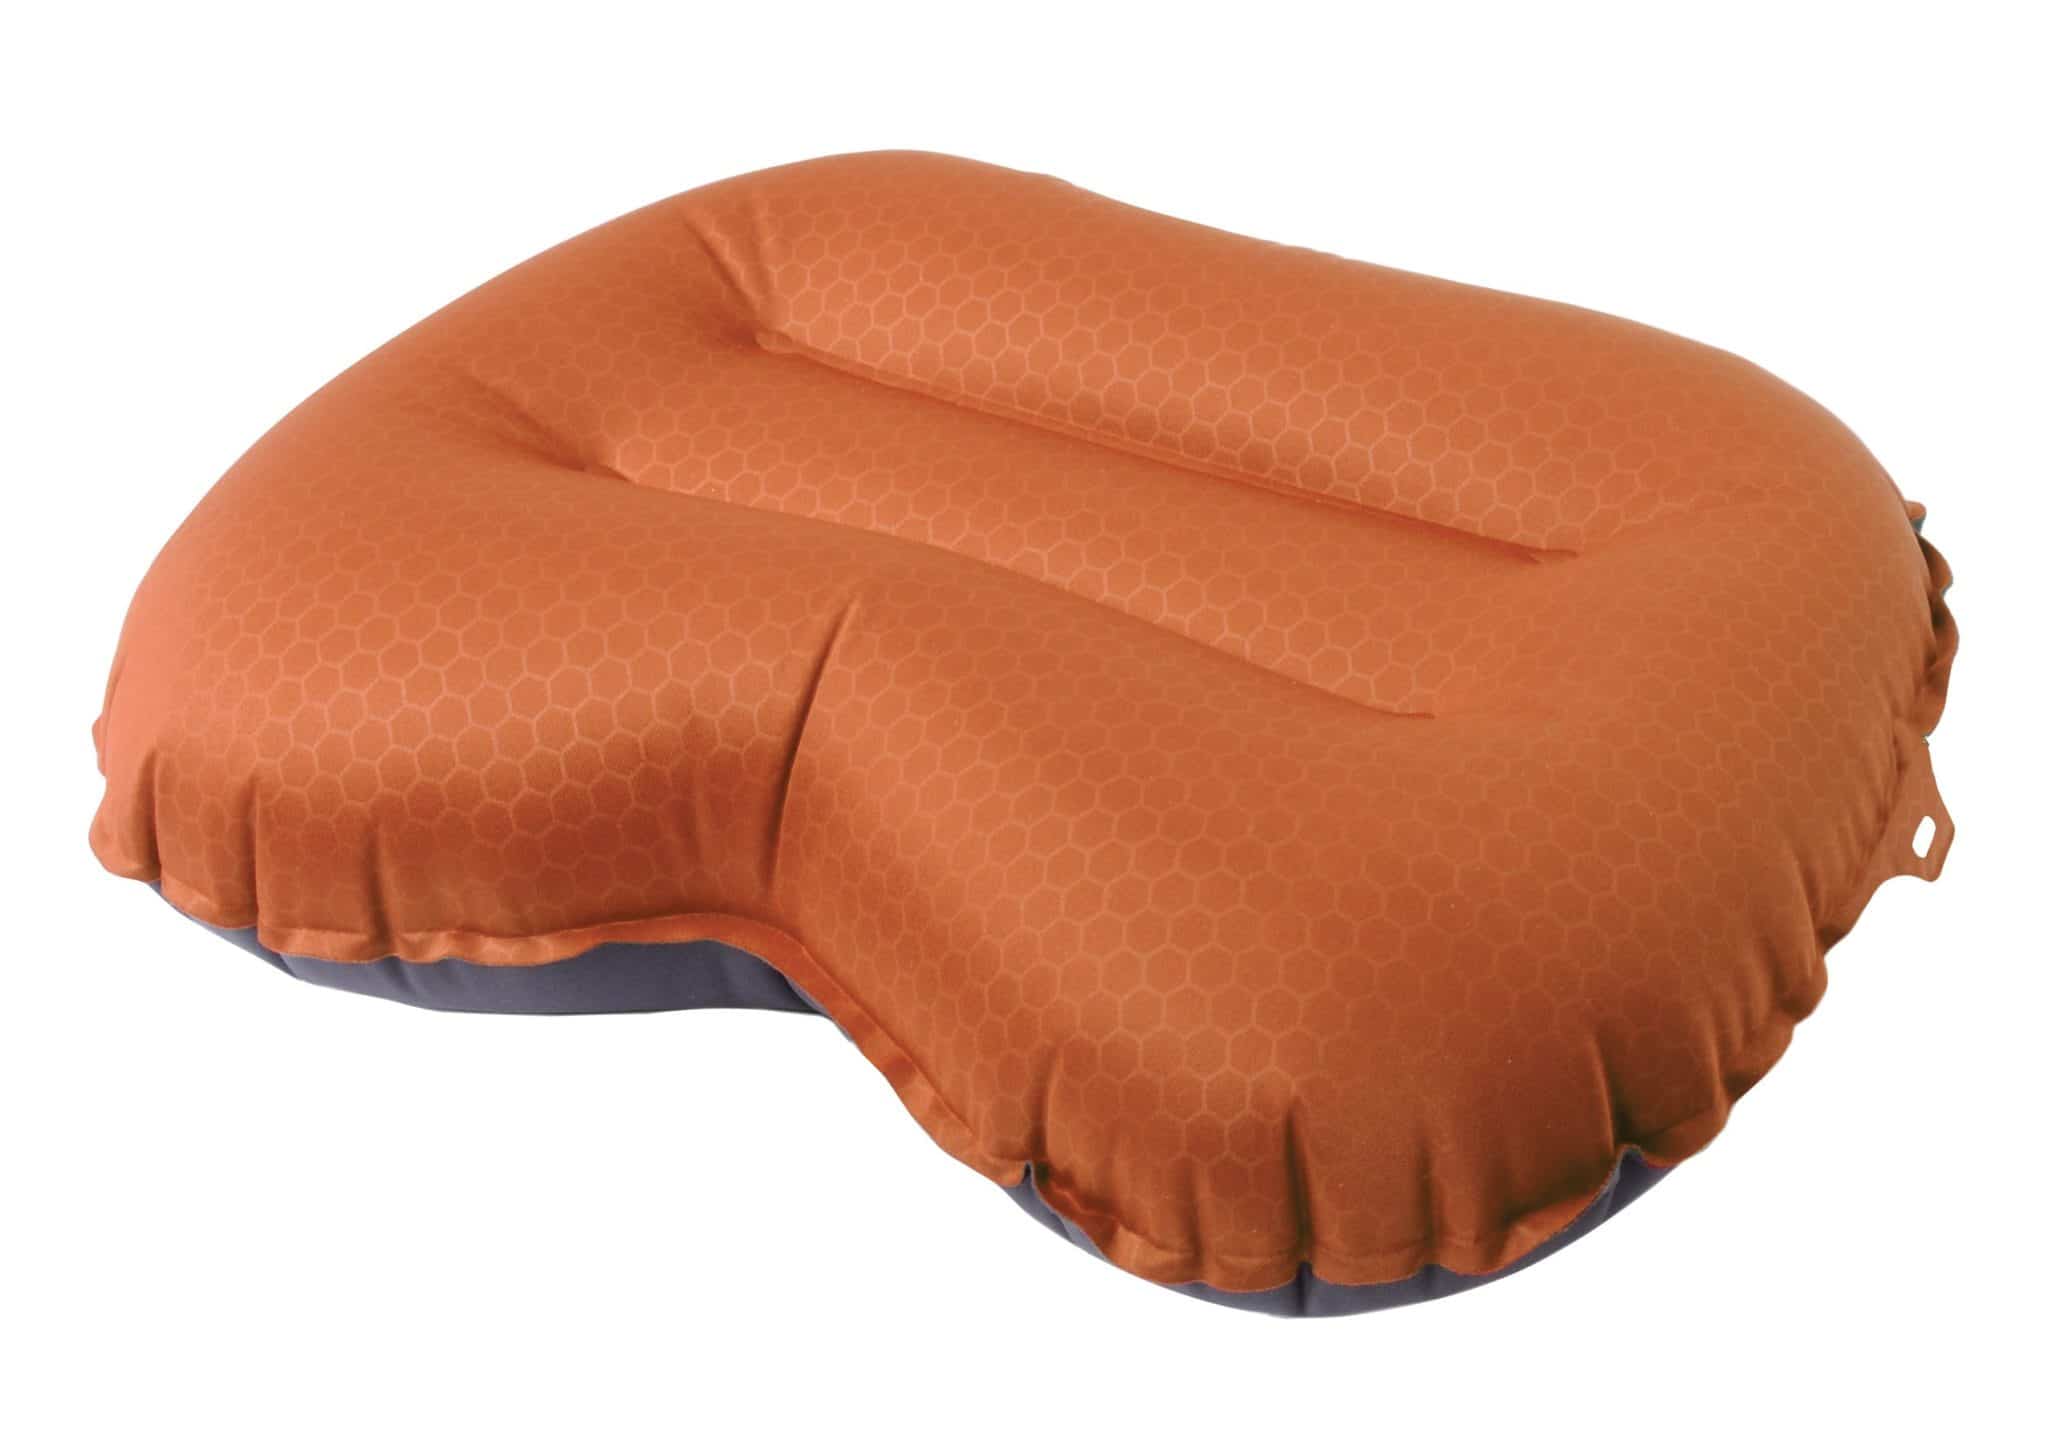 Exped air pillow lite